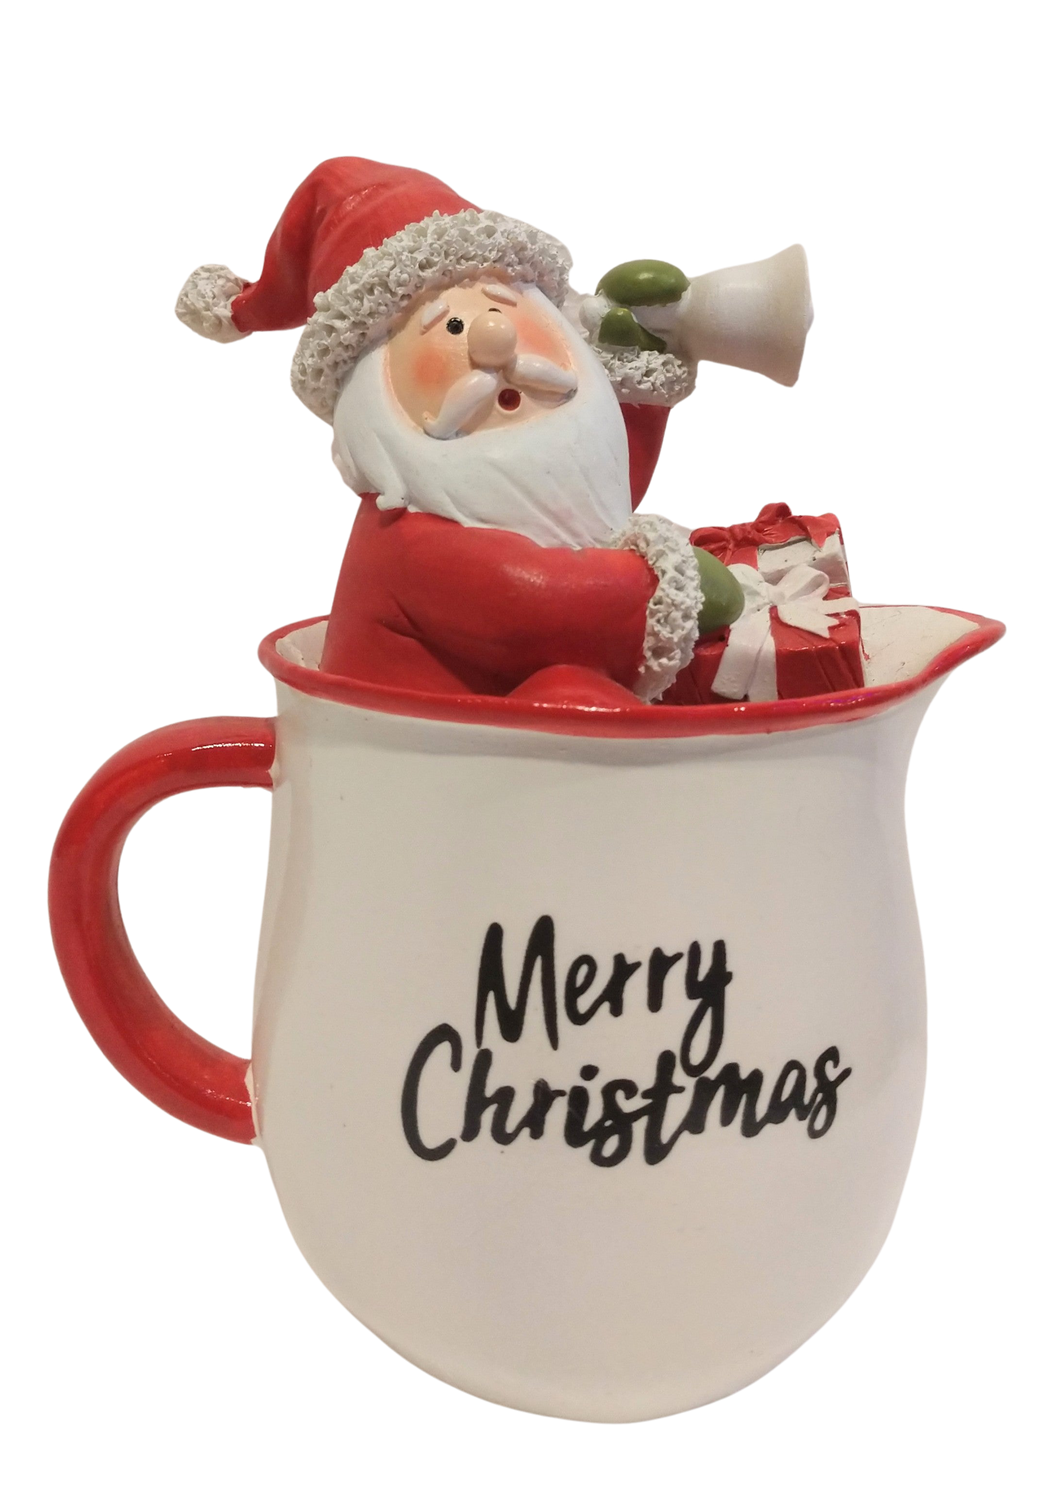 Santa in A Merry Christmas Mug with Christmas Gifts & Bell 7